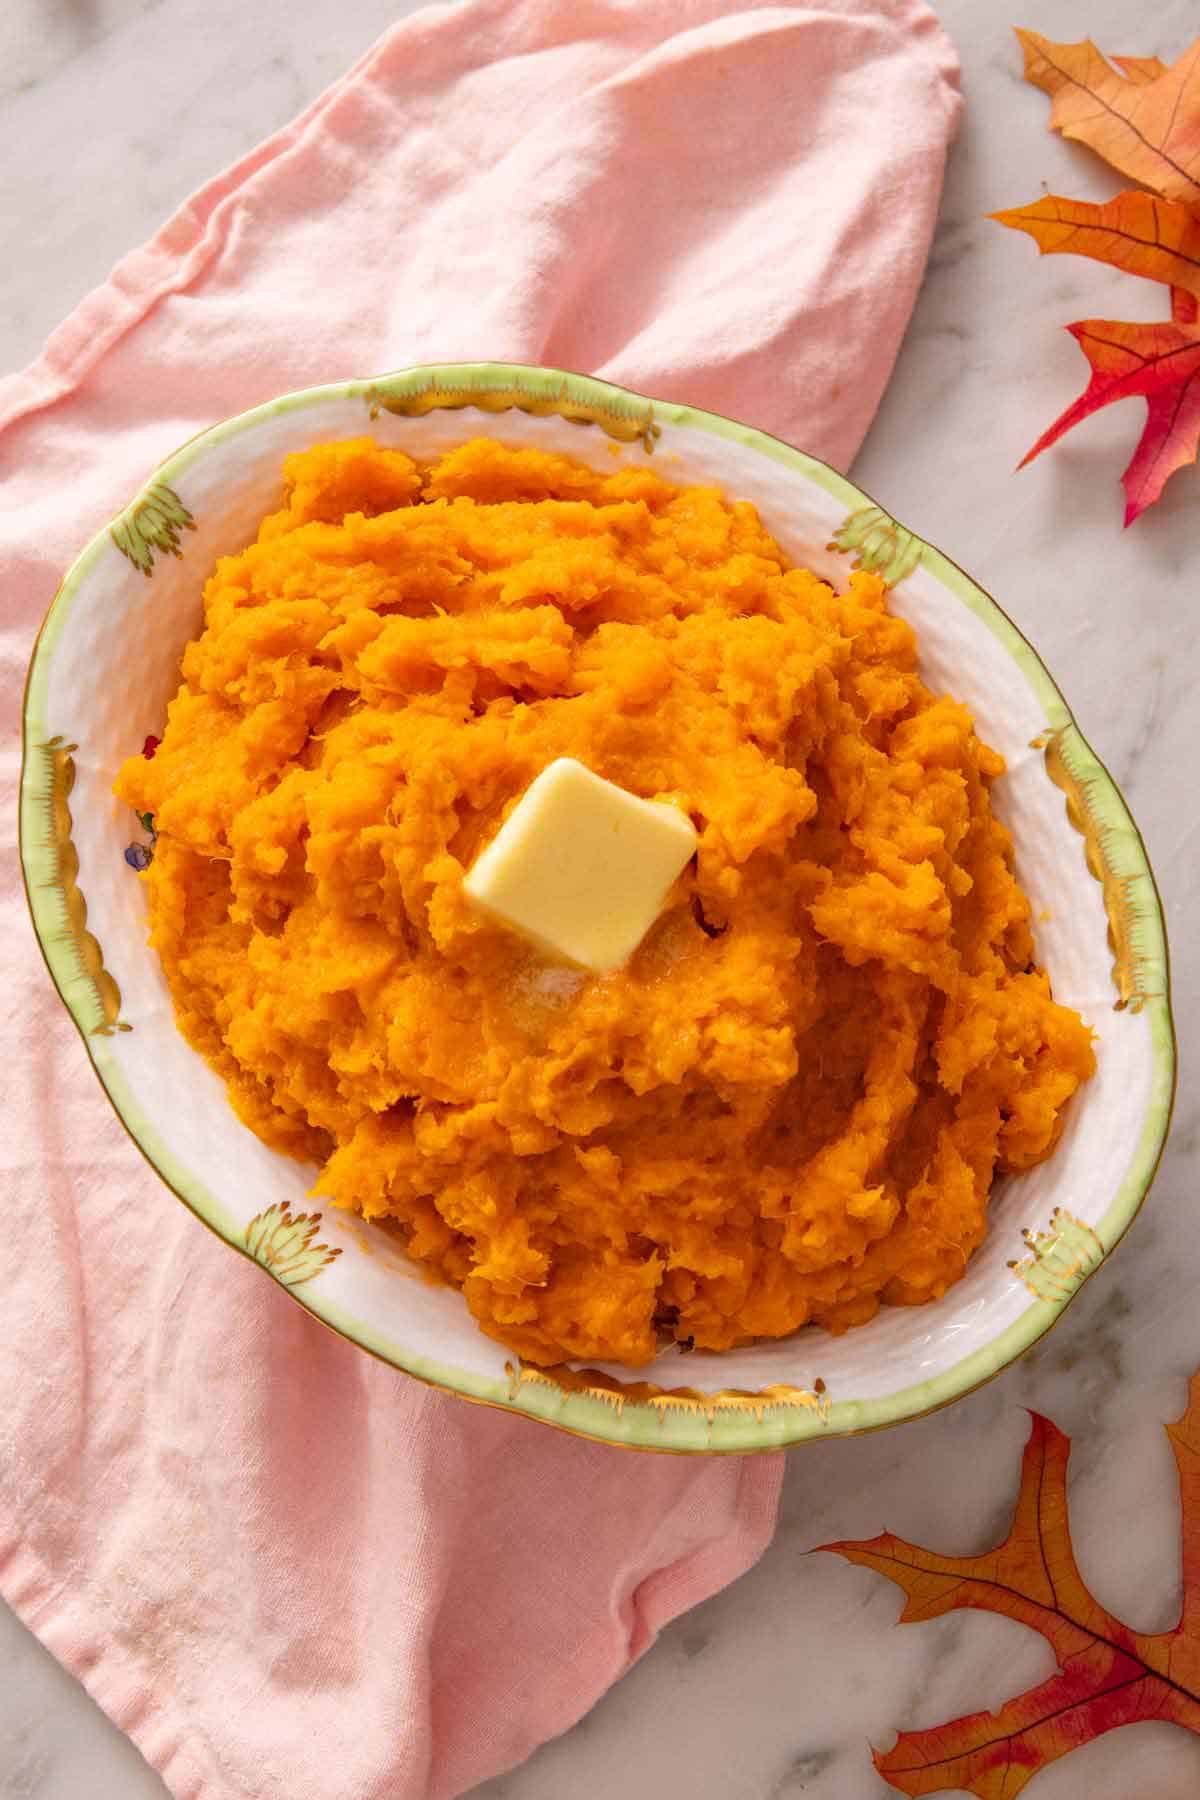 Overhead view of an oval platter of mashed sweet potatoes with butter on top. A pink linen underneath the platter and some leaves on the side.